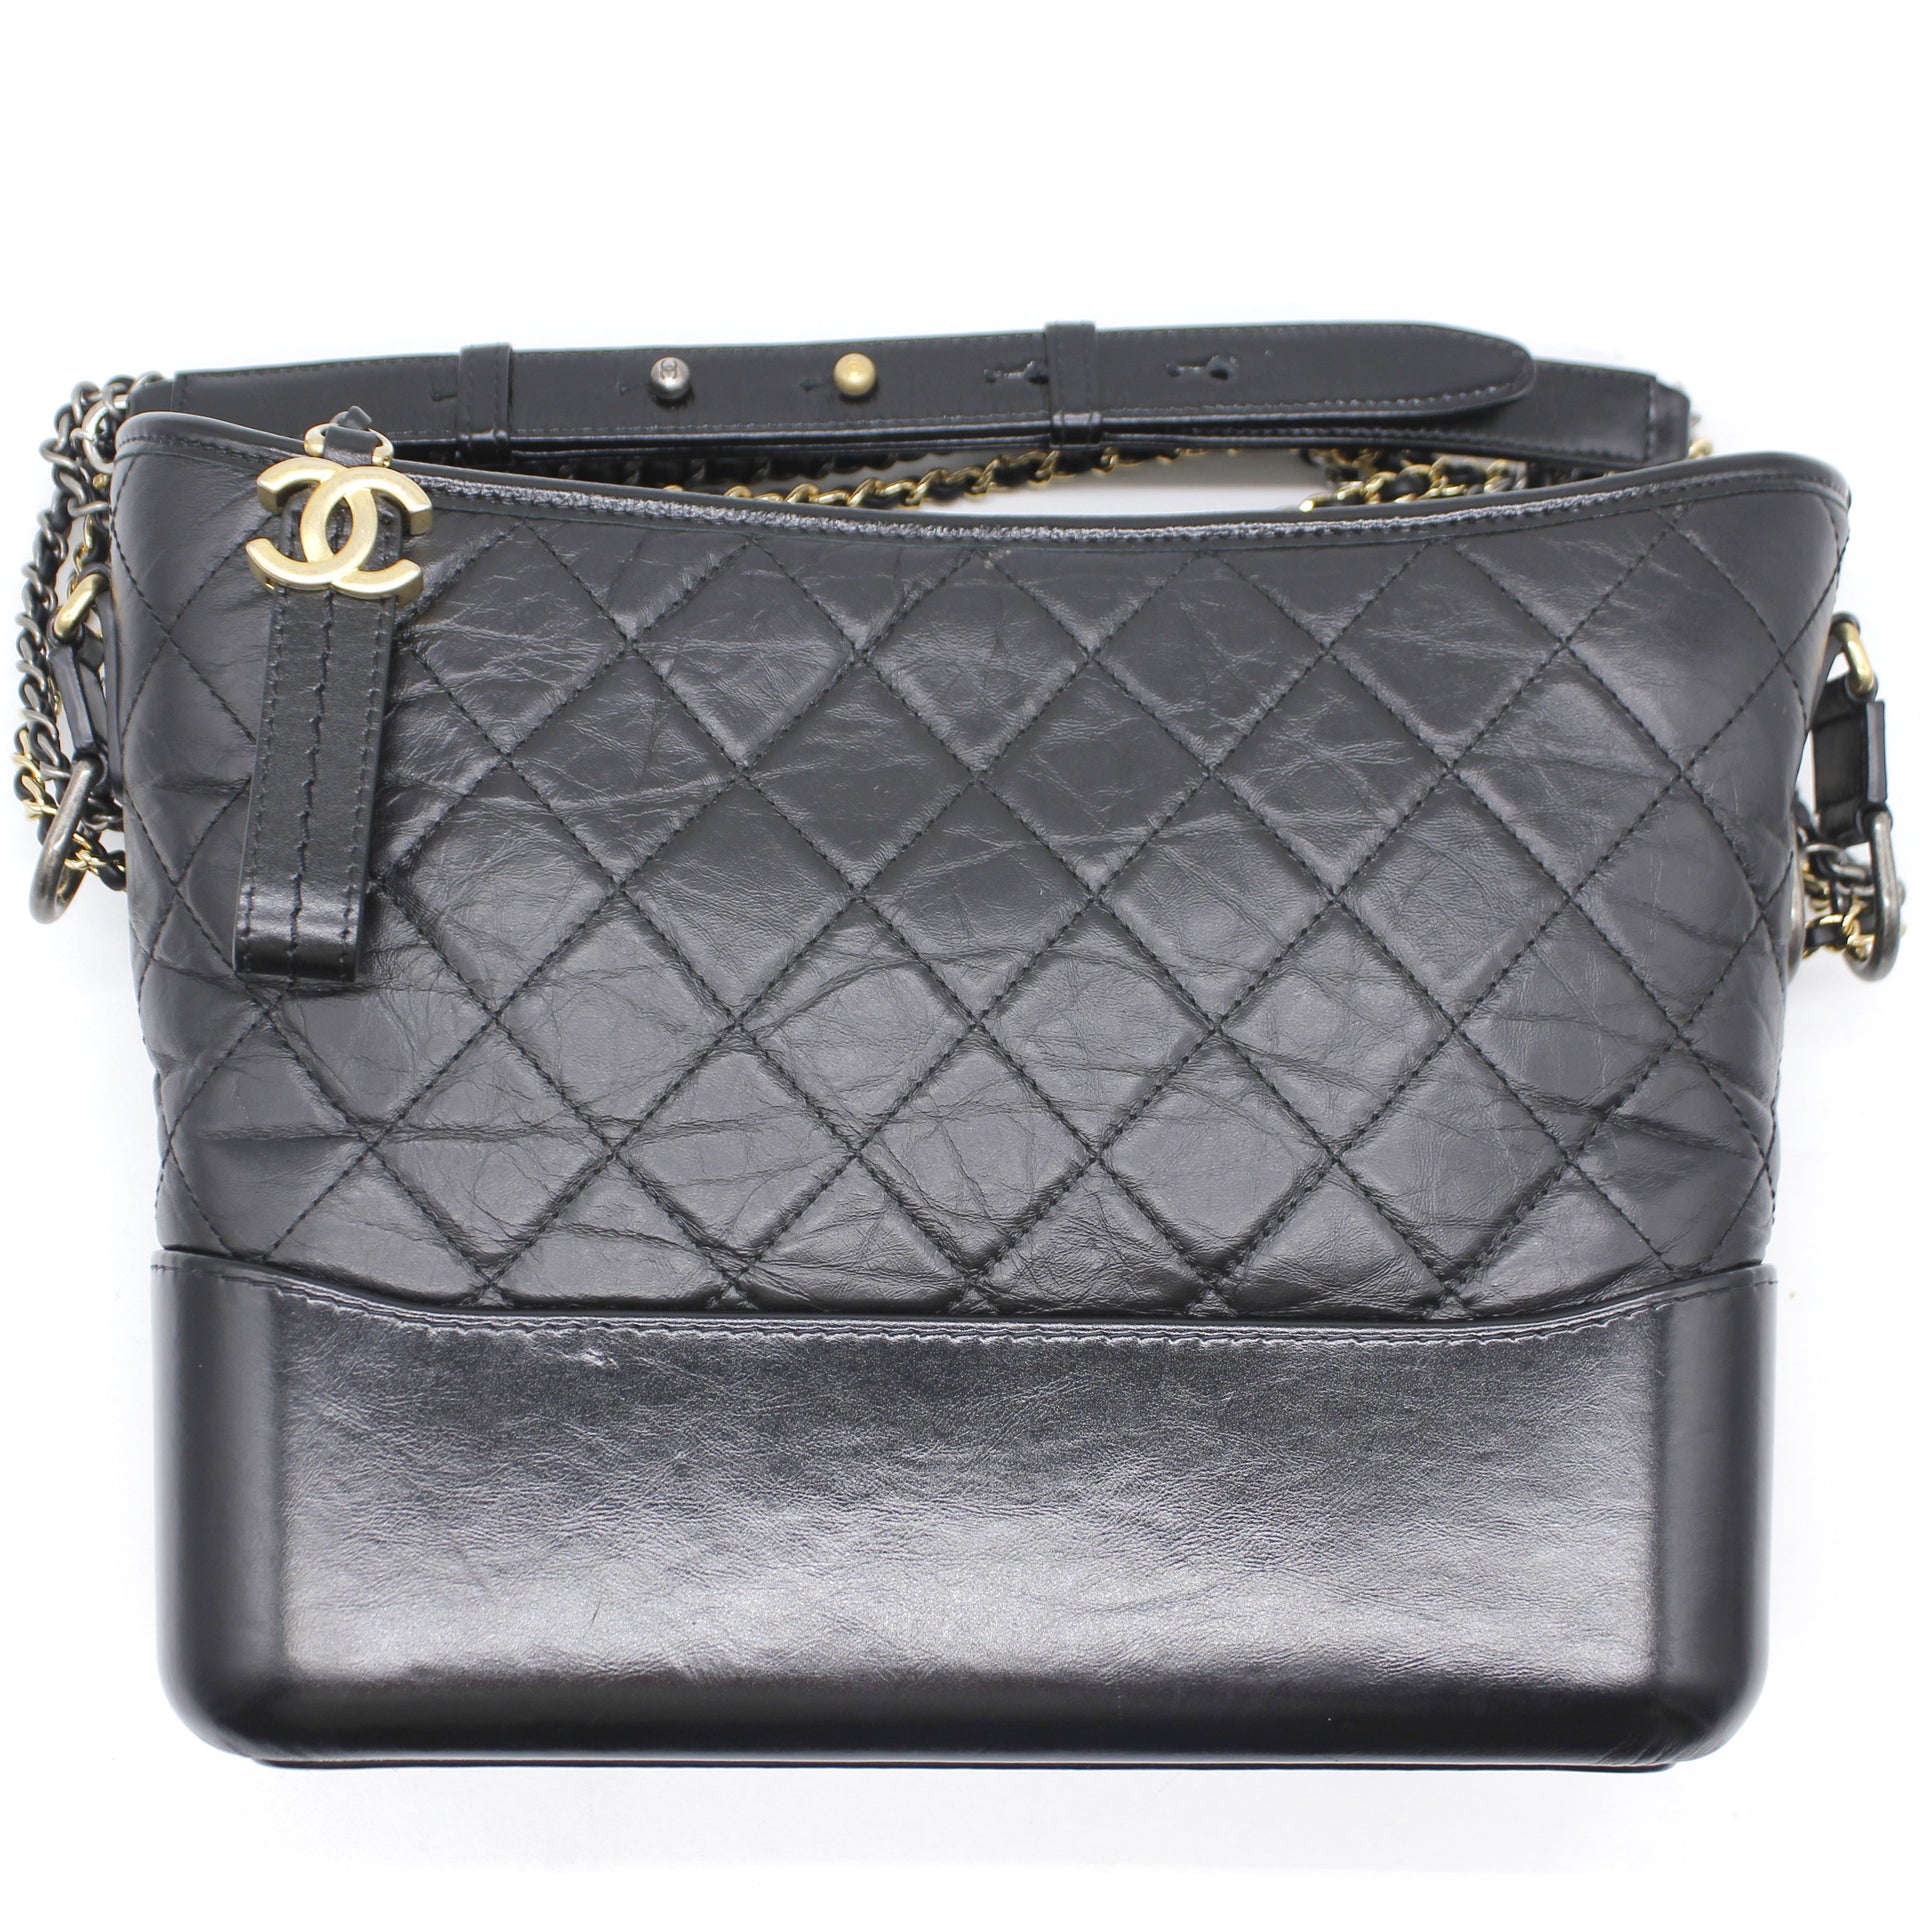 Chanel Black Quilted Aged Calfskin Leather Gabrielle Hobo Bag